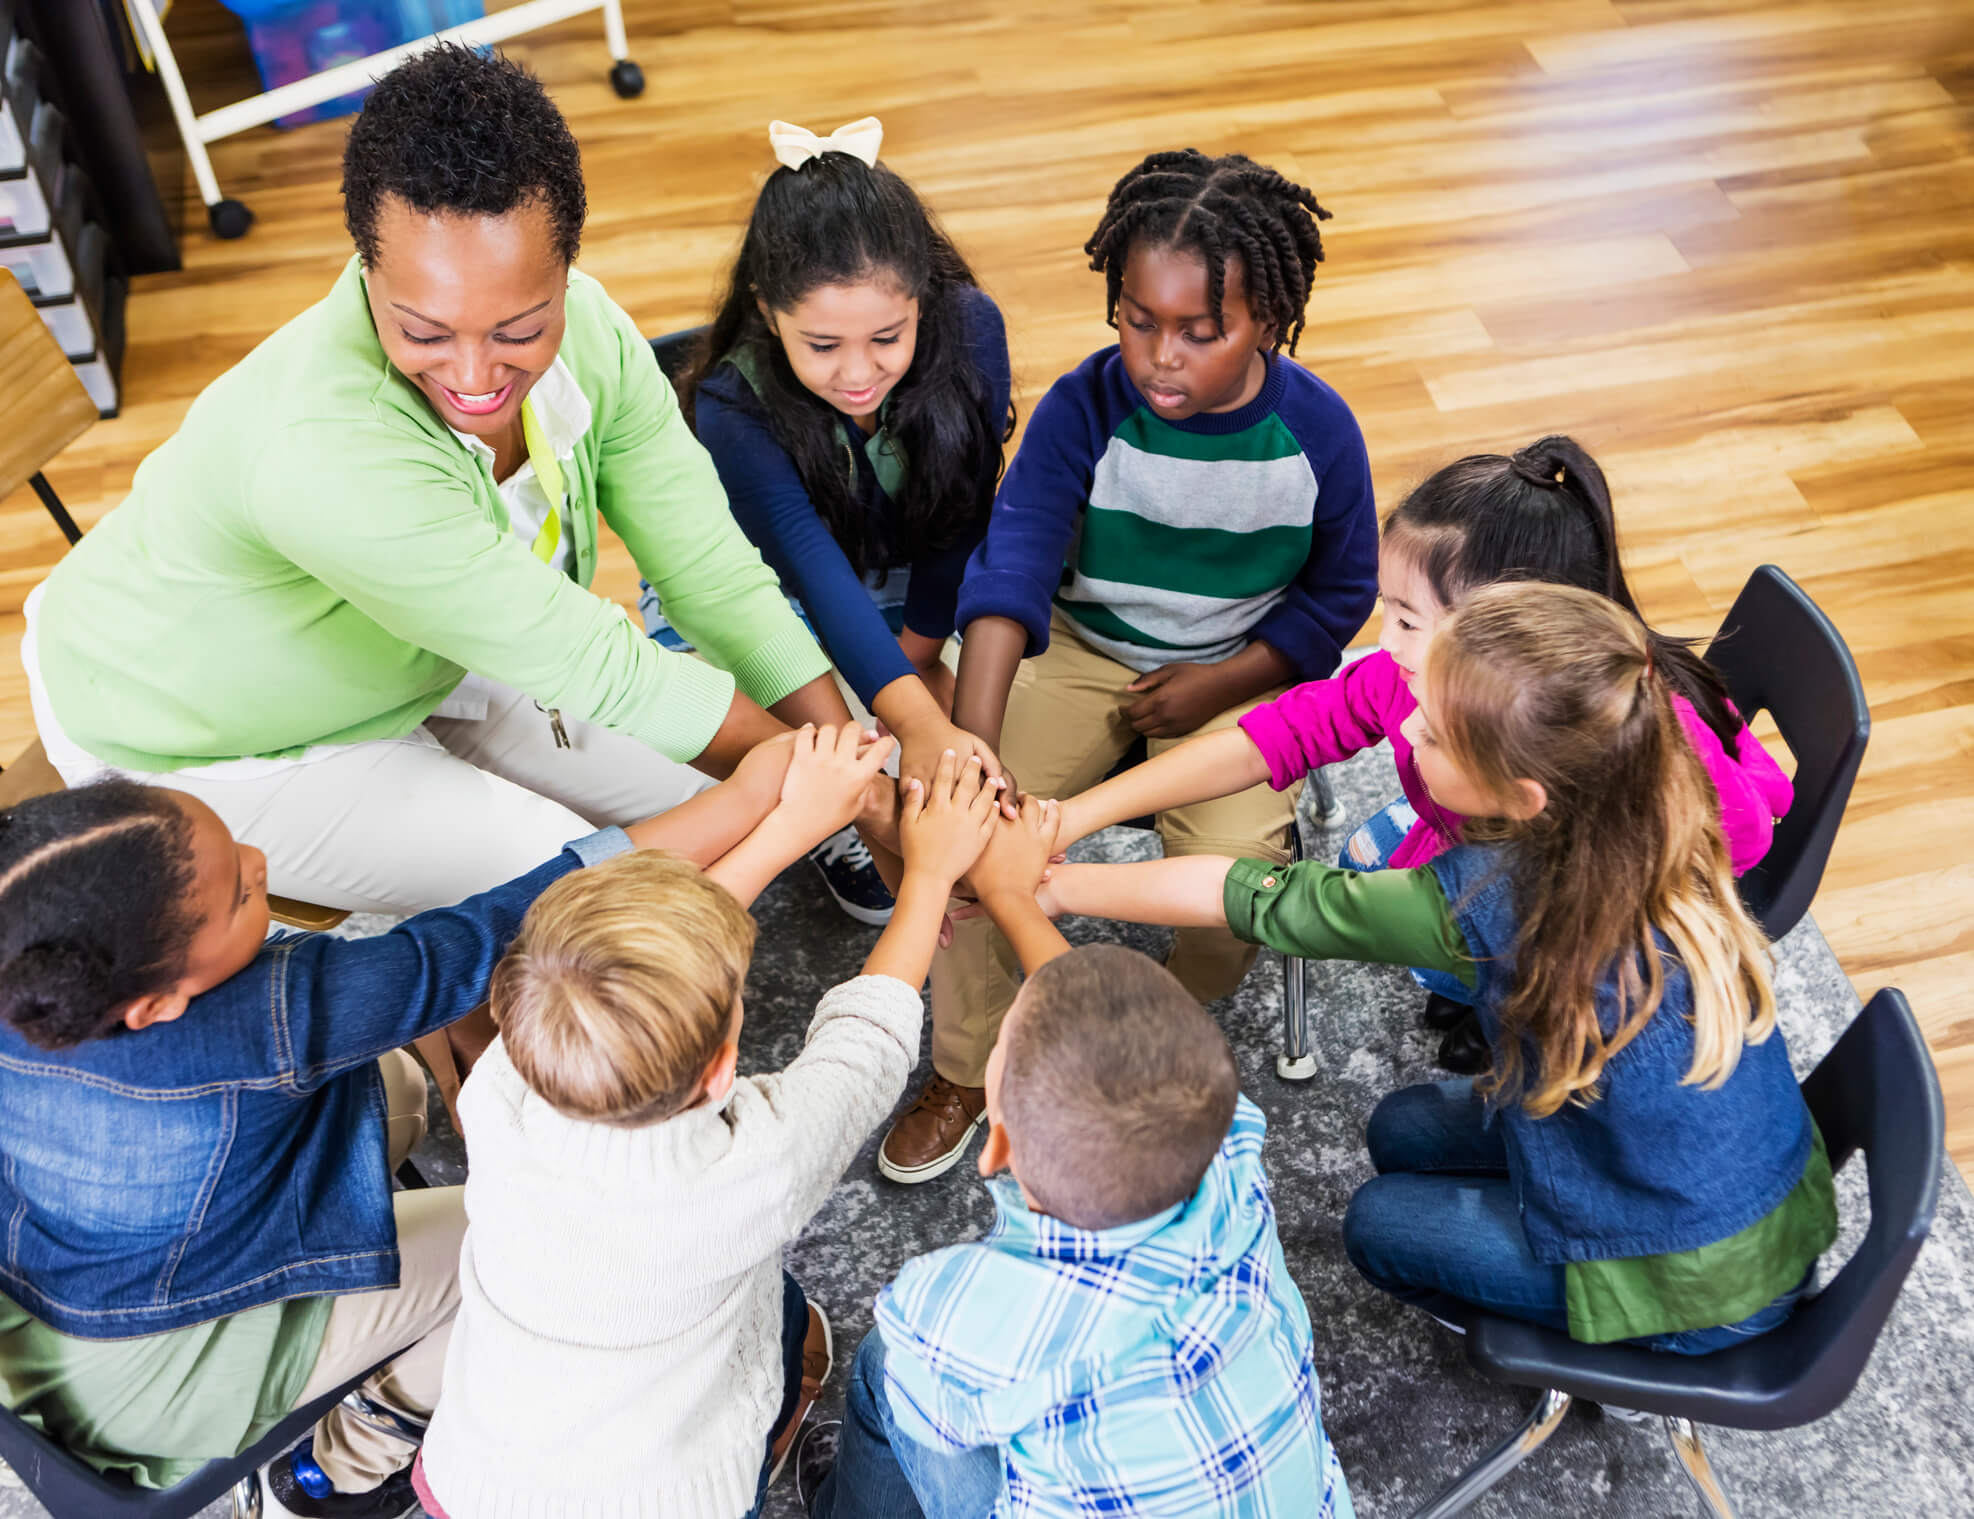 How to Keep Students Engaged: Interactive Teaching Activities to Maintain Student Engagement